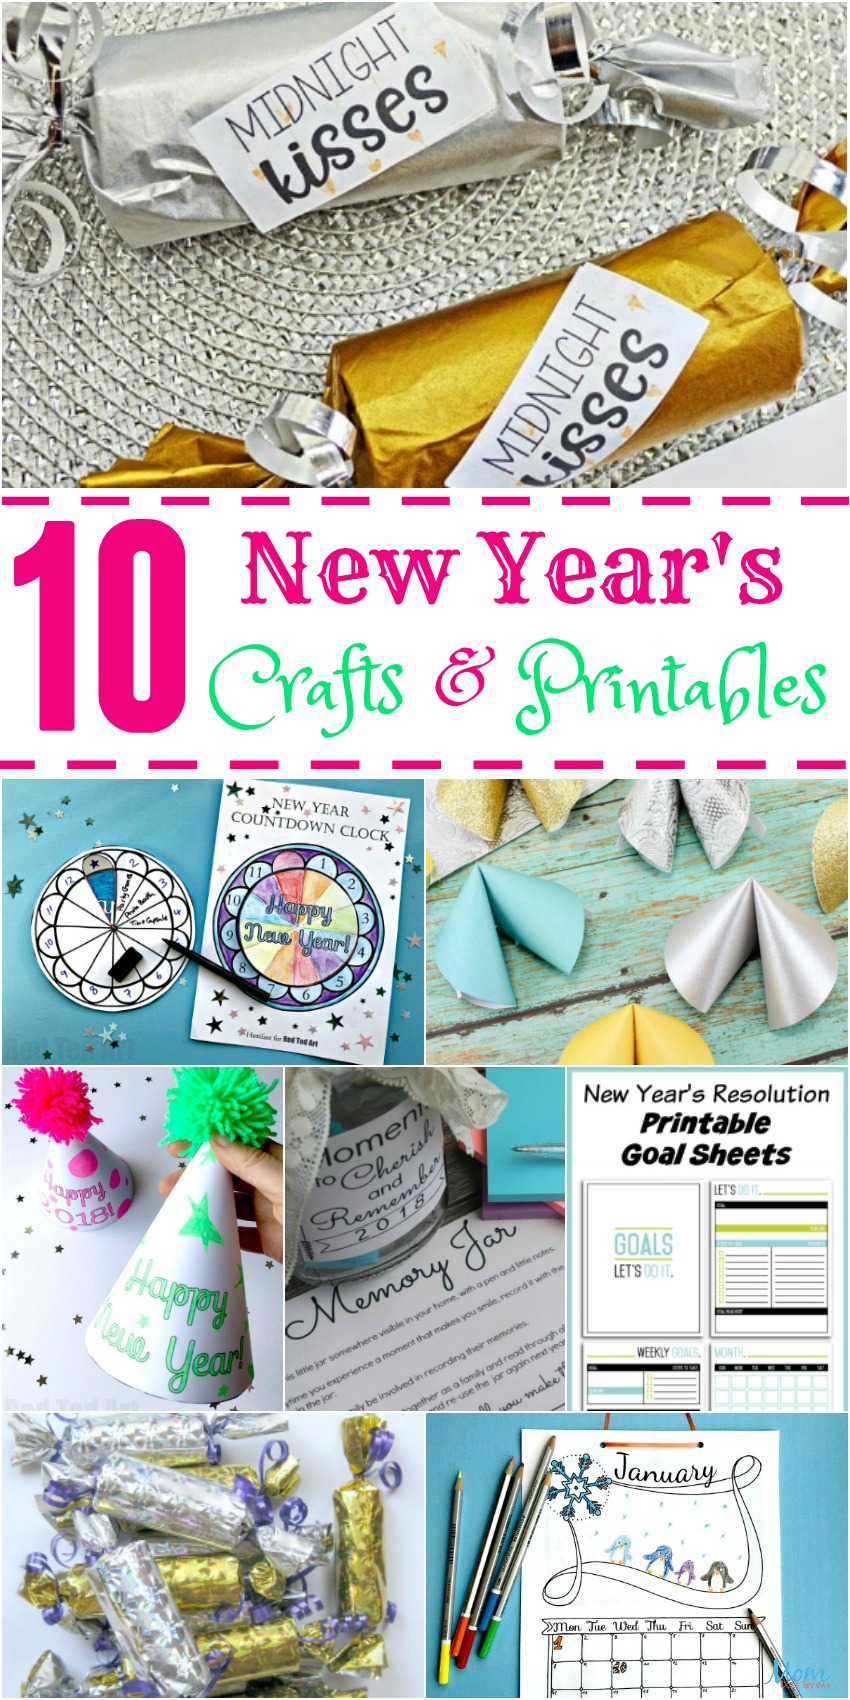 10 New Year’s Crafts and Printables to Help you Celebrate #crafts #printables #newyear